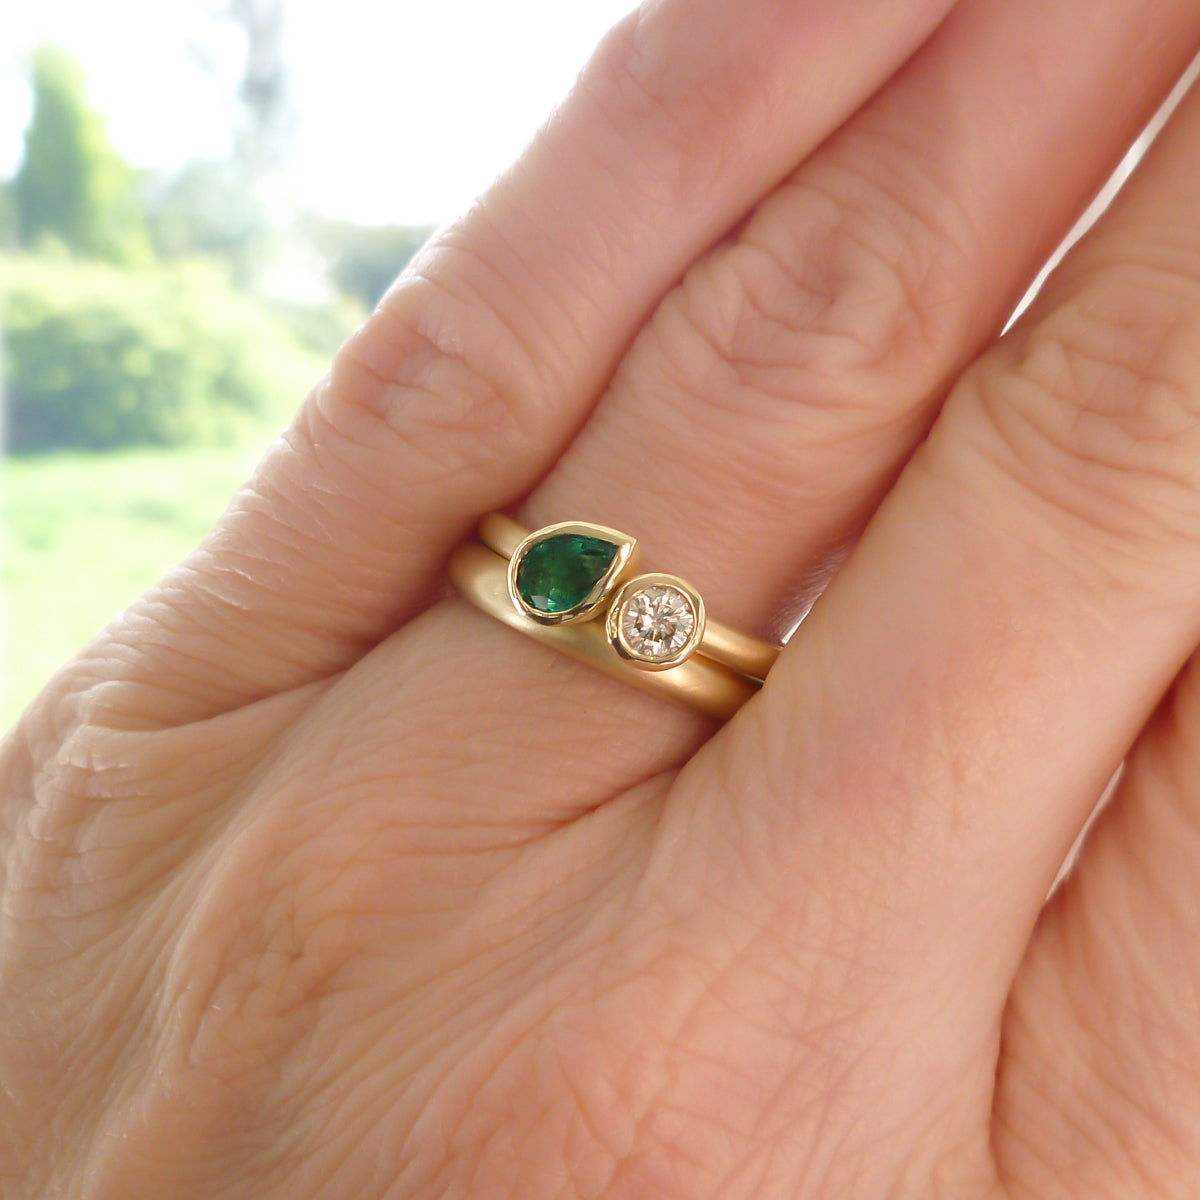 Pear shape emerald and diamond ring contemporary unique and modern.